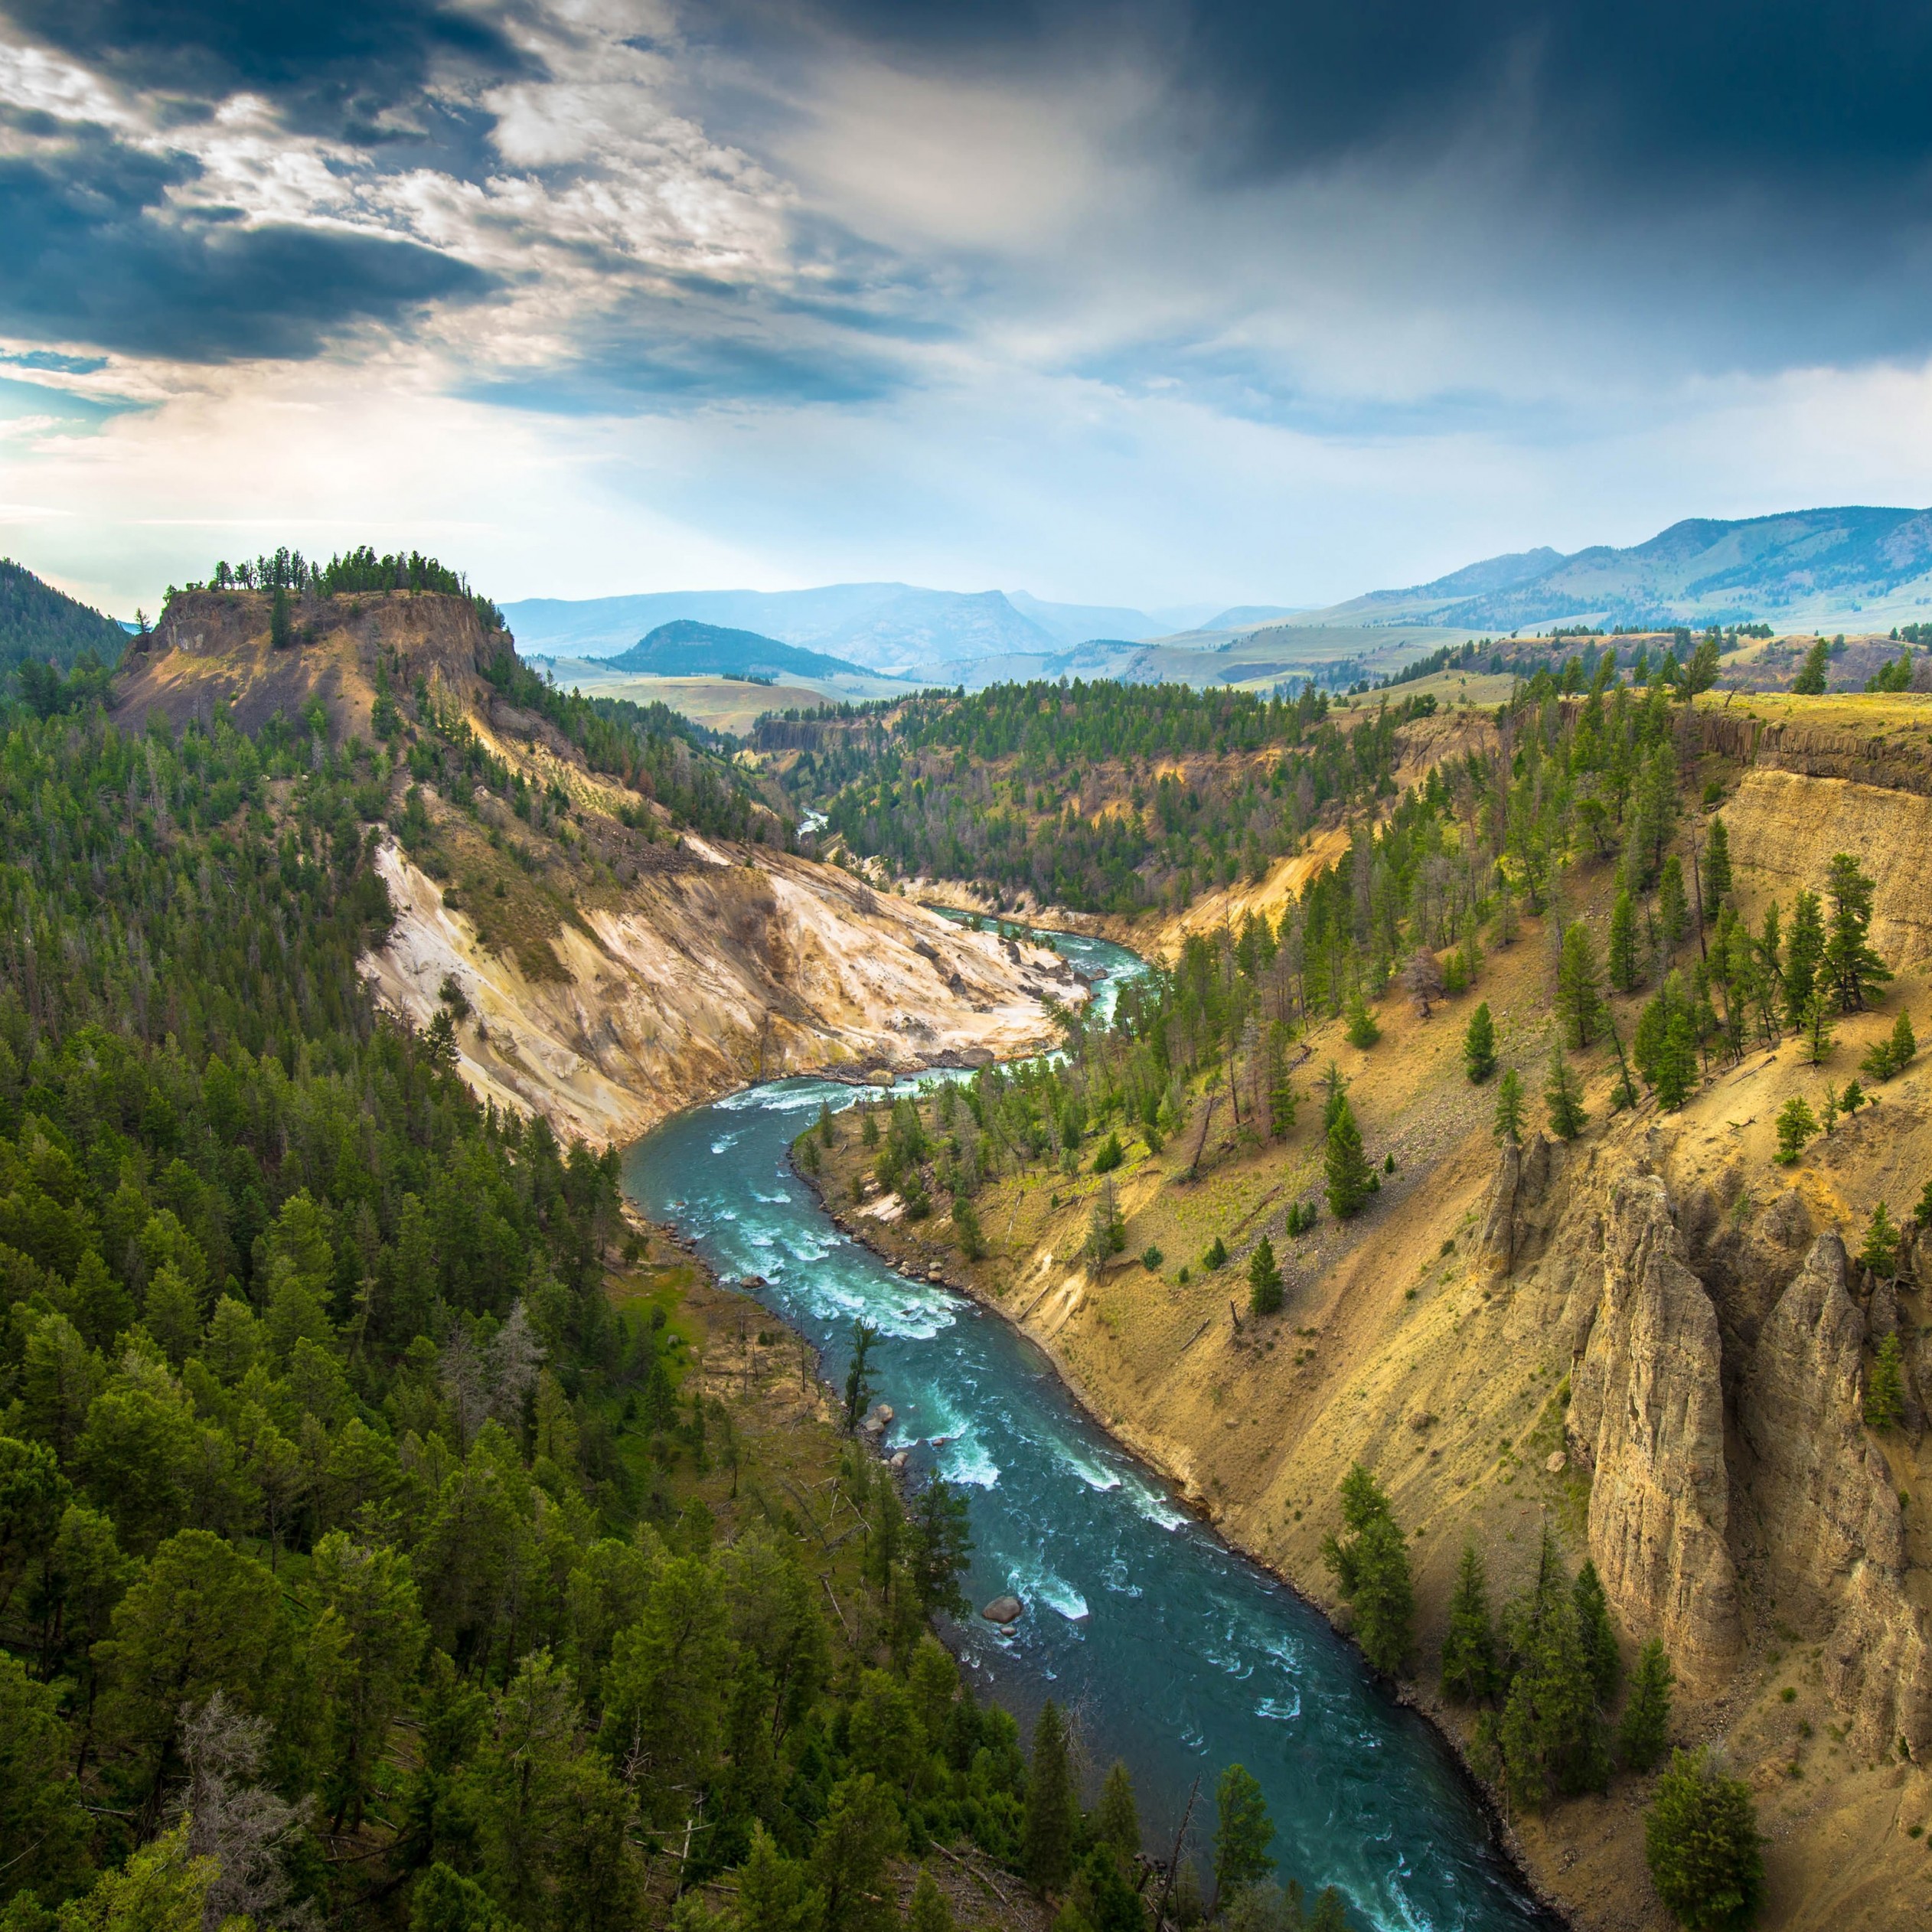 The River, Grand Canyon of Yellowstone National Park, USA Wallpaper for Apple iPad mini 2